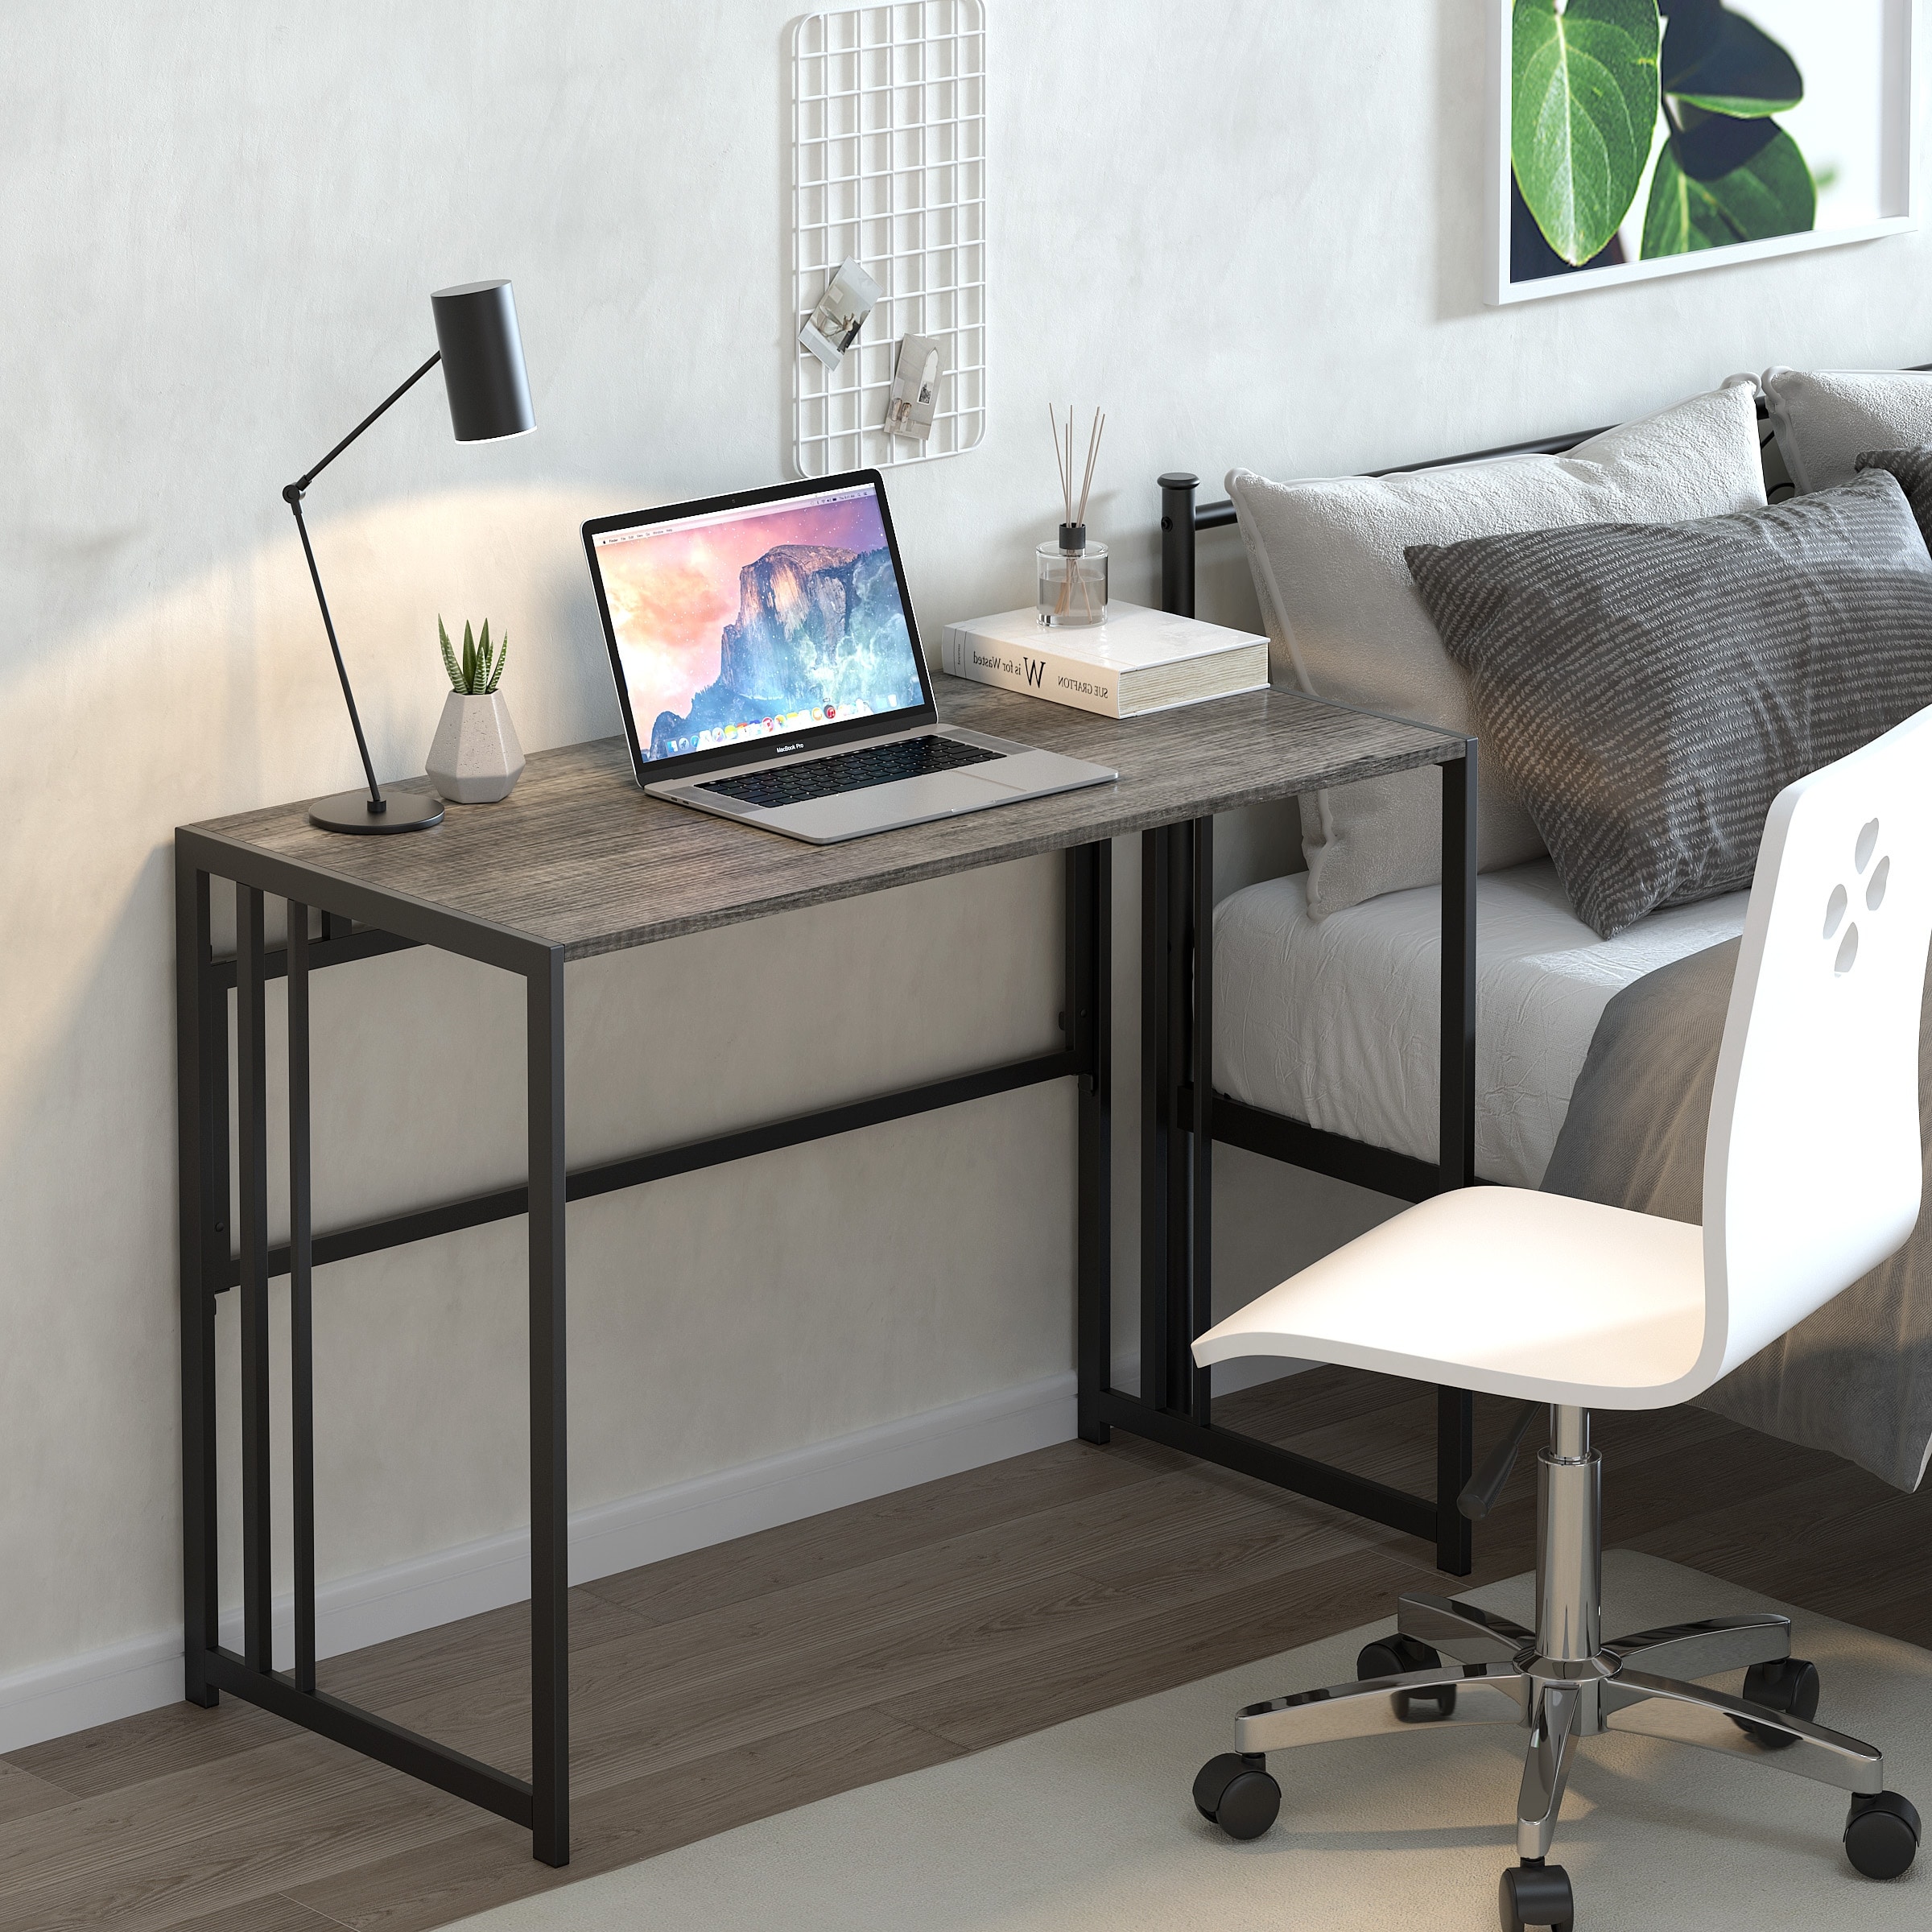 https://ak1.ostkcdn.com/images/products/is/images/direct/7db589caefb637f020efd97e14fabaad15d55e0d/Teraves-Folding-Desk-Small-Computer-Desk-Study-Corner-Desk-Writing-Table-for-Home-Office.jpg